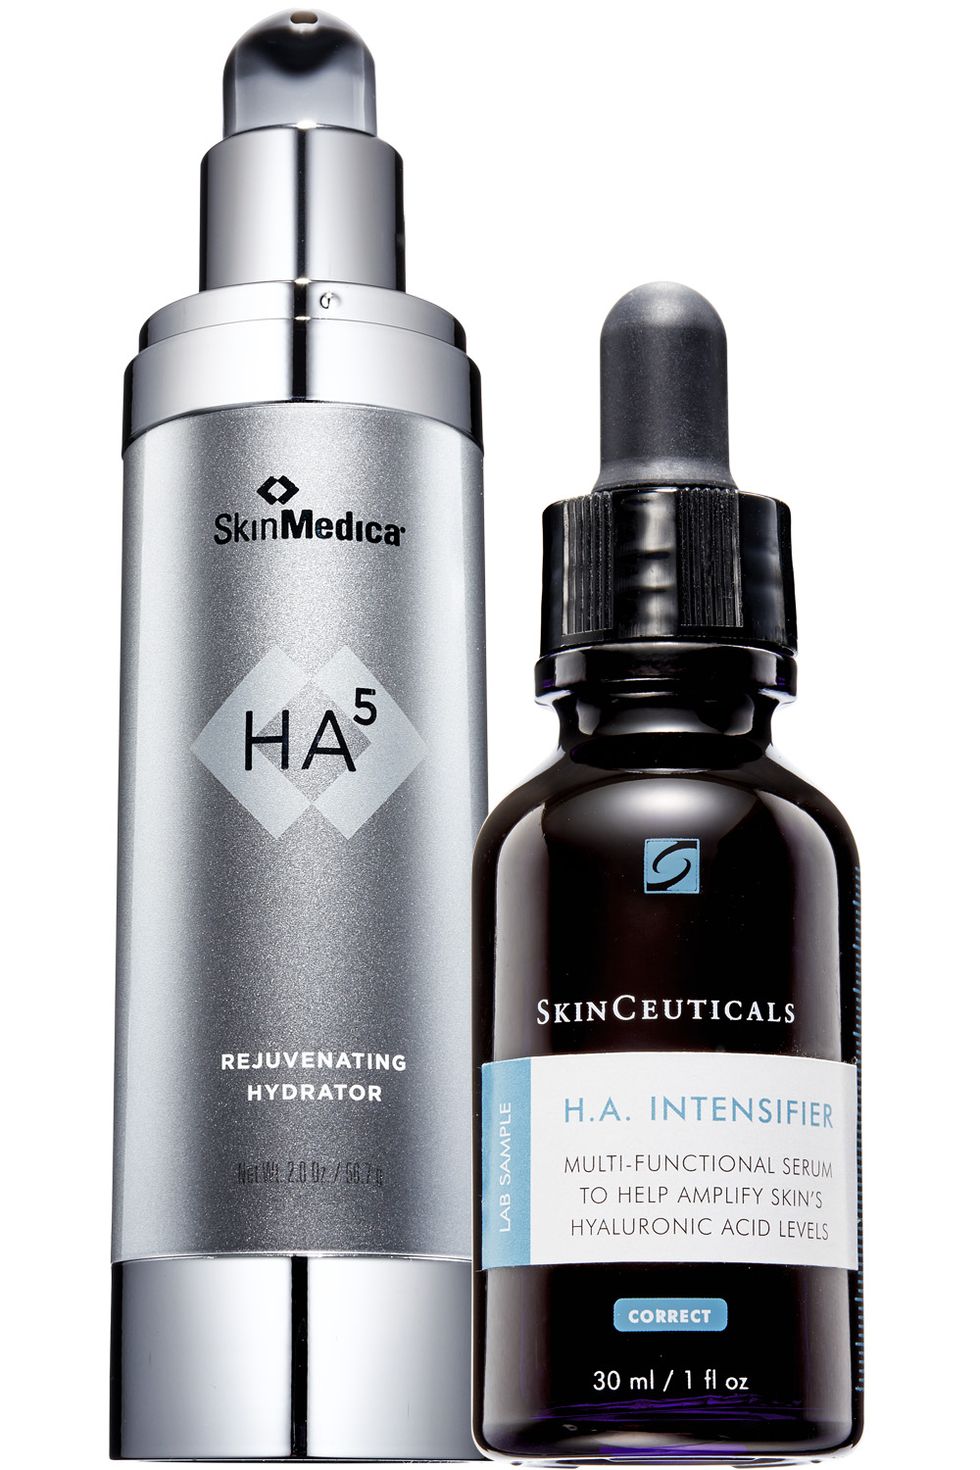 <p>Supercharged hyaluronic acid serums&nbsp;provide immediate moisture and&nbsp;skin-plumping benefits—and improve&nbsp;overall texture in about 12 weeks, says&nbsp;dermatologist Shino Bay Aguilera, M.D.</p><p><em data-redactor-tag="em" data-verified="redactor">From left:</em>&nbsp;<a href="https://www.skinmedica.com/products/correct/ha5rejuvenatinghydrator" target="_blank" data-tracking-id="recirc-text-link">SkinMedica HA5 Rejuvenating Hydrator</a> ($178); <a href="http://www.dermstore.com/product_Hyaluronic+Acid+Intensifier_70312.htm?gclid=CjwKEAjwoLfHBRD_jLW93remyAQSJABIygGpfFrxJDQHSX5MrO9Xe9d9A1ni1Ykvaj8h2uqW5IWjwxoCZu_w_wcB&amp;scid=scplp70312&amp;sc_intid=70312&amp;utm_source=fro&amp;utm_medium=paid_search&amp;utm_term=skin+care&amp;utm_campaign=100113" target="_blank" data-tracking-id="recirc-text-link">SkinCeuticals H.A. Intensifier</a> ($98).<strong data-redactor-tag="strong"></strong></p>